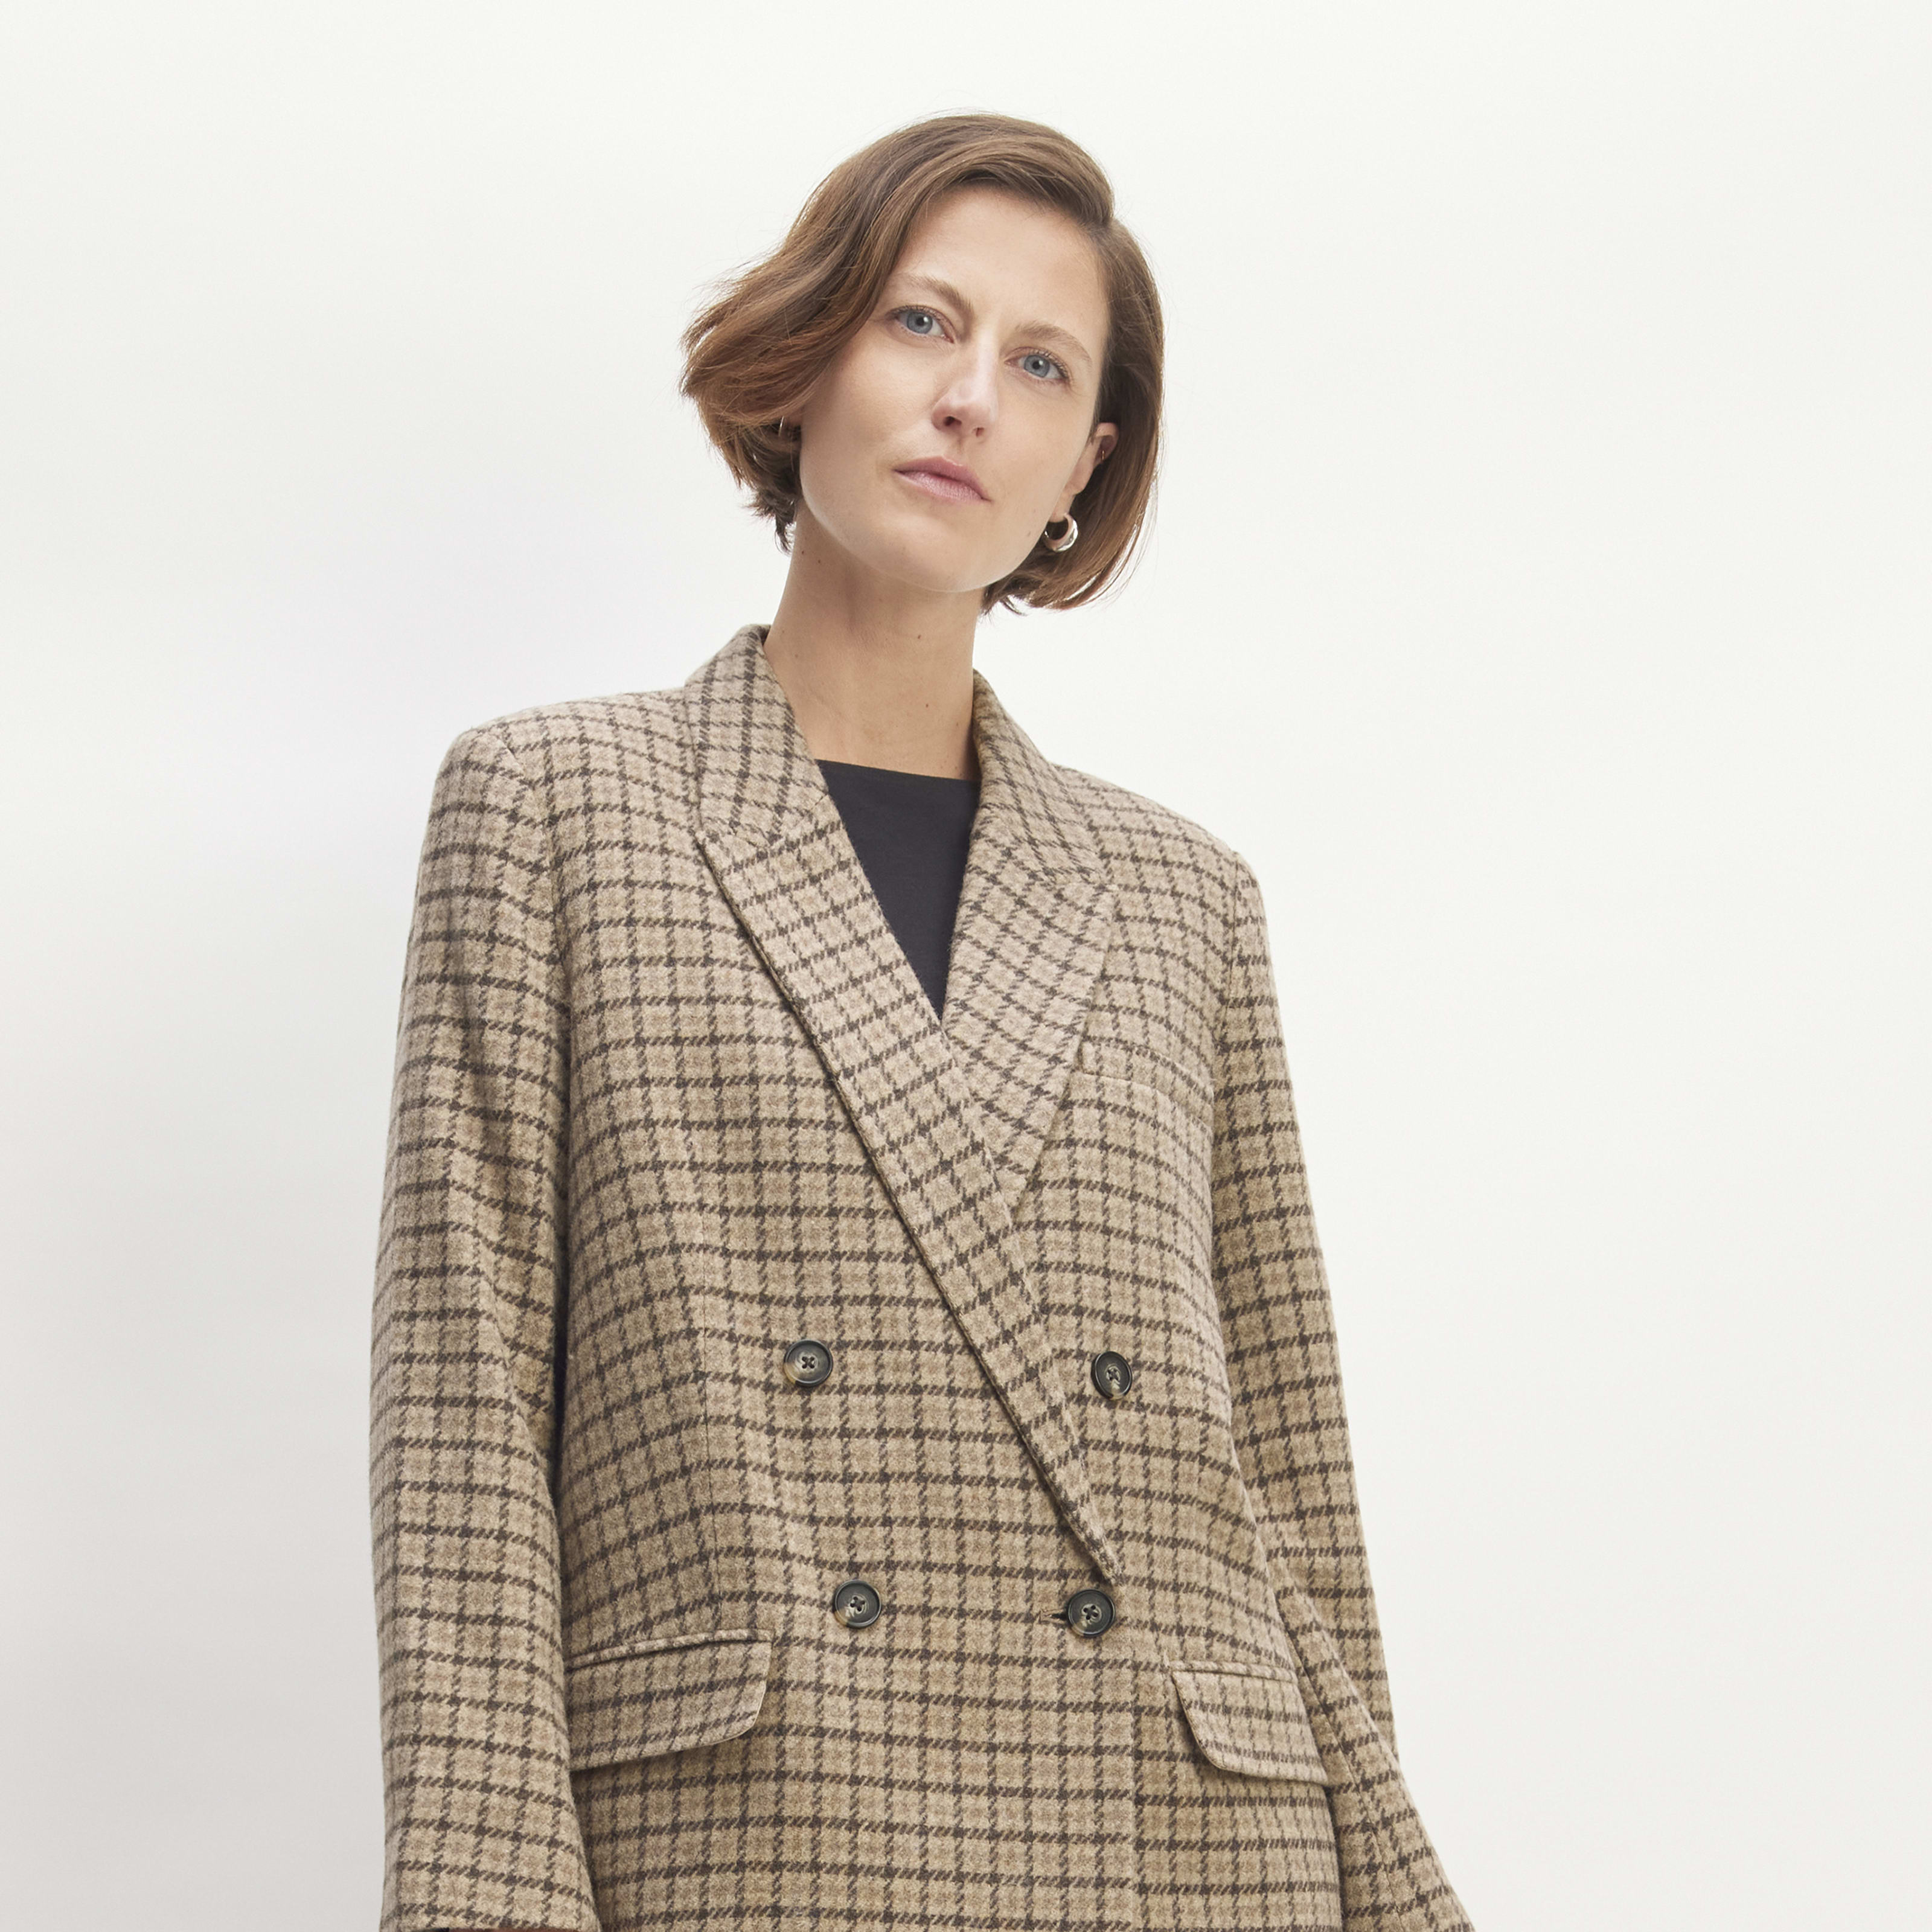 women's rewoolâ® double-breasted blazer by everlane in beige houndstooth, size 00